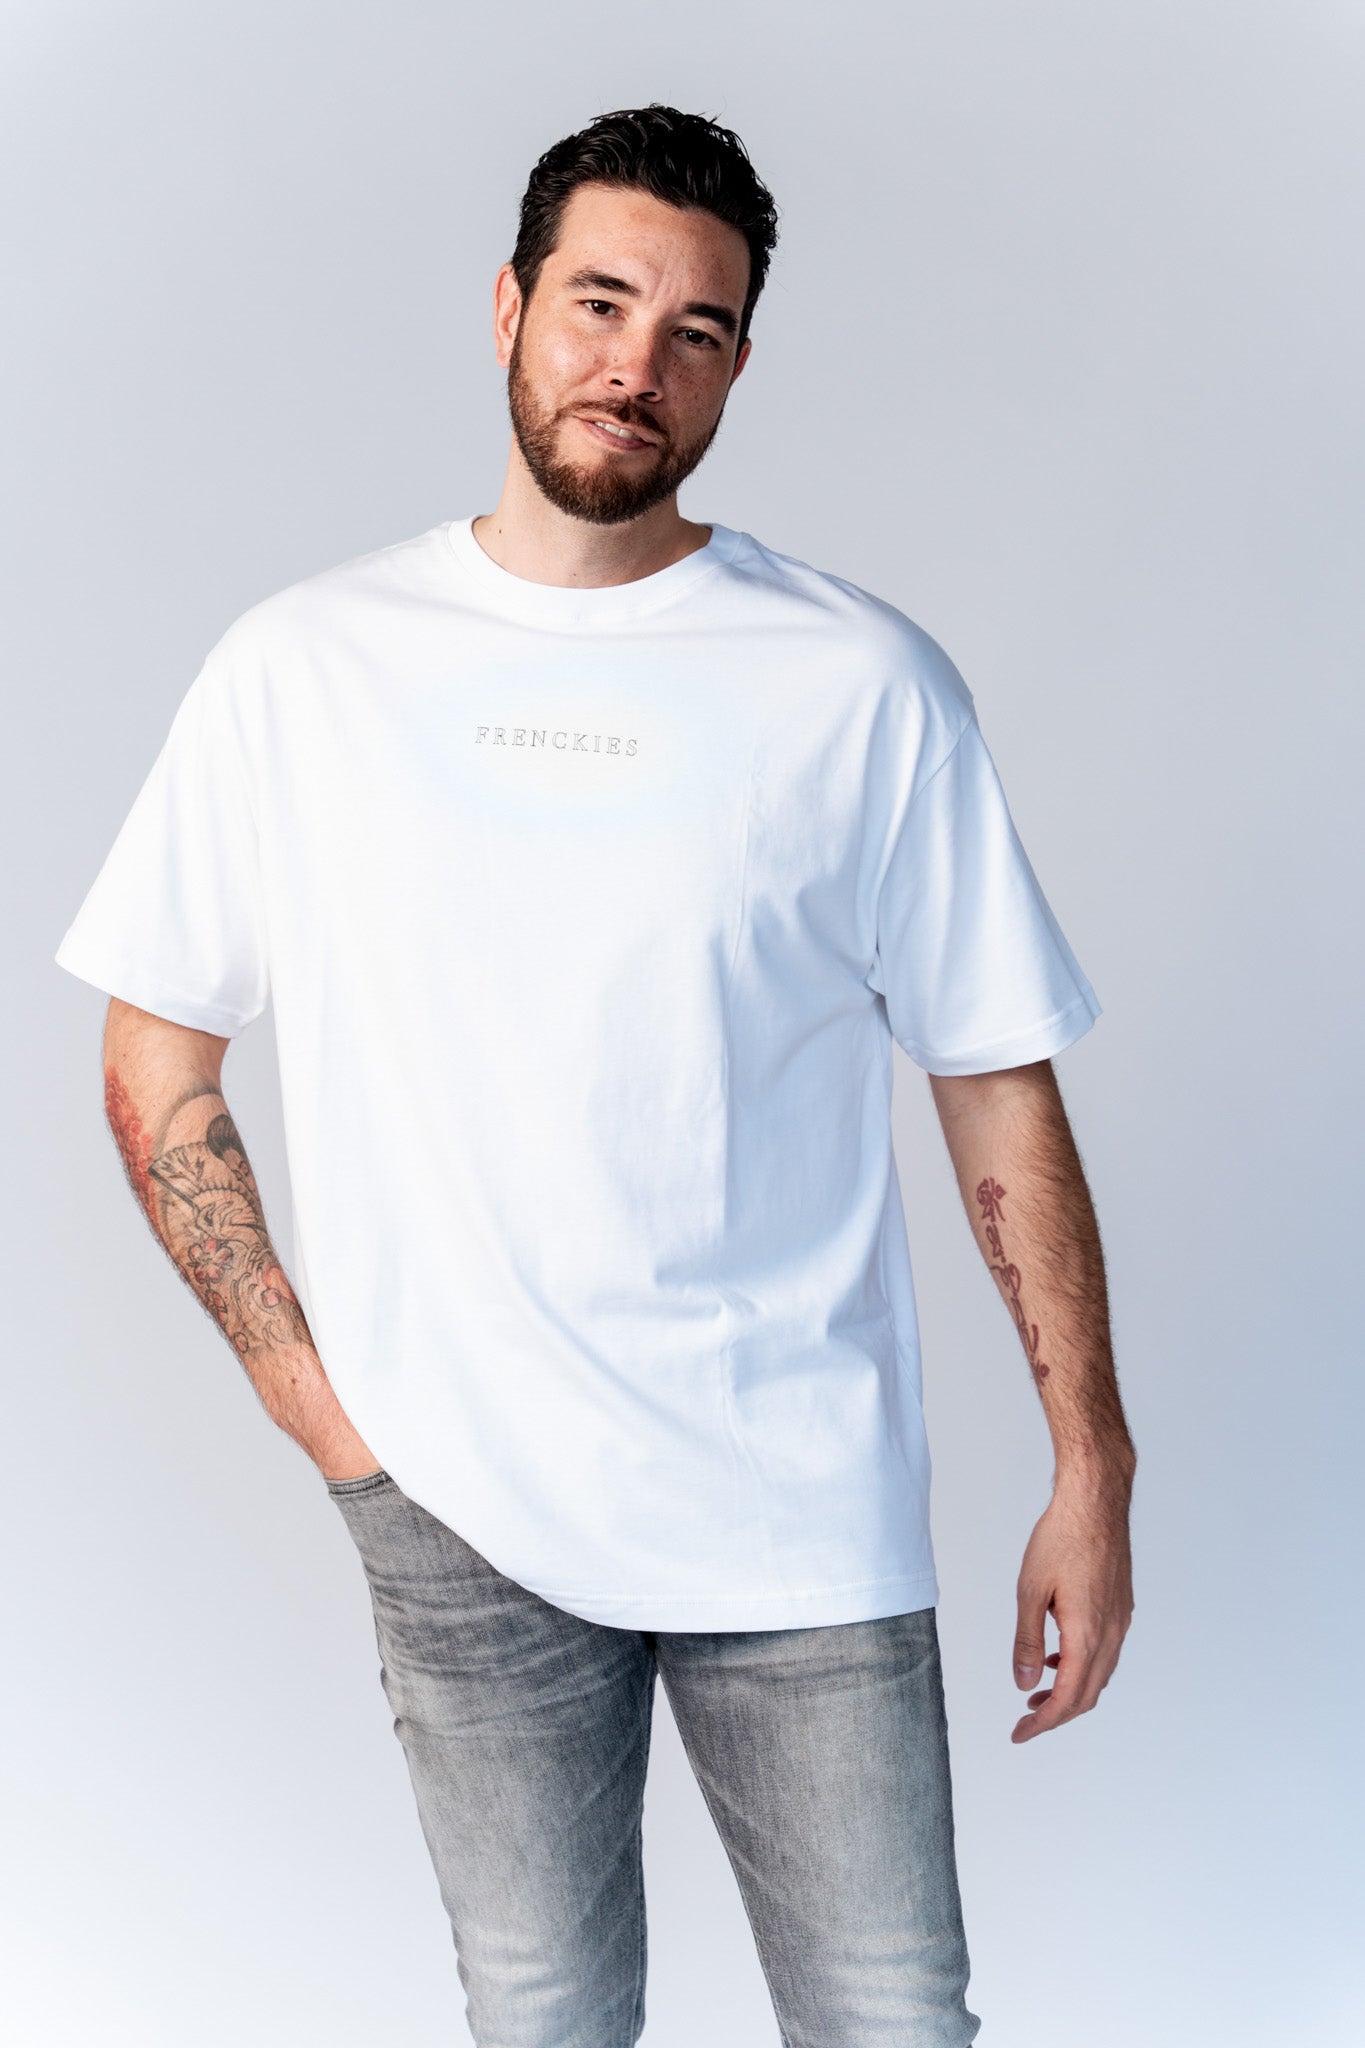 Frenckies Oversized T-Shirt White with black print